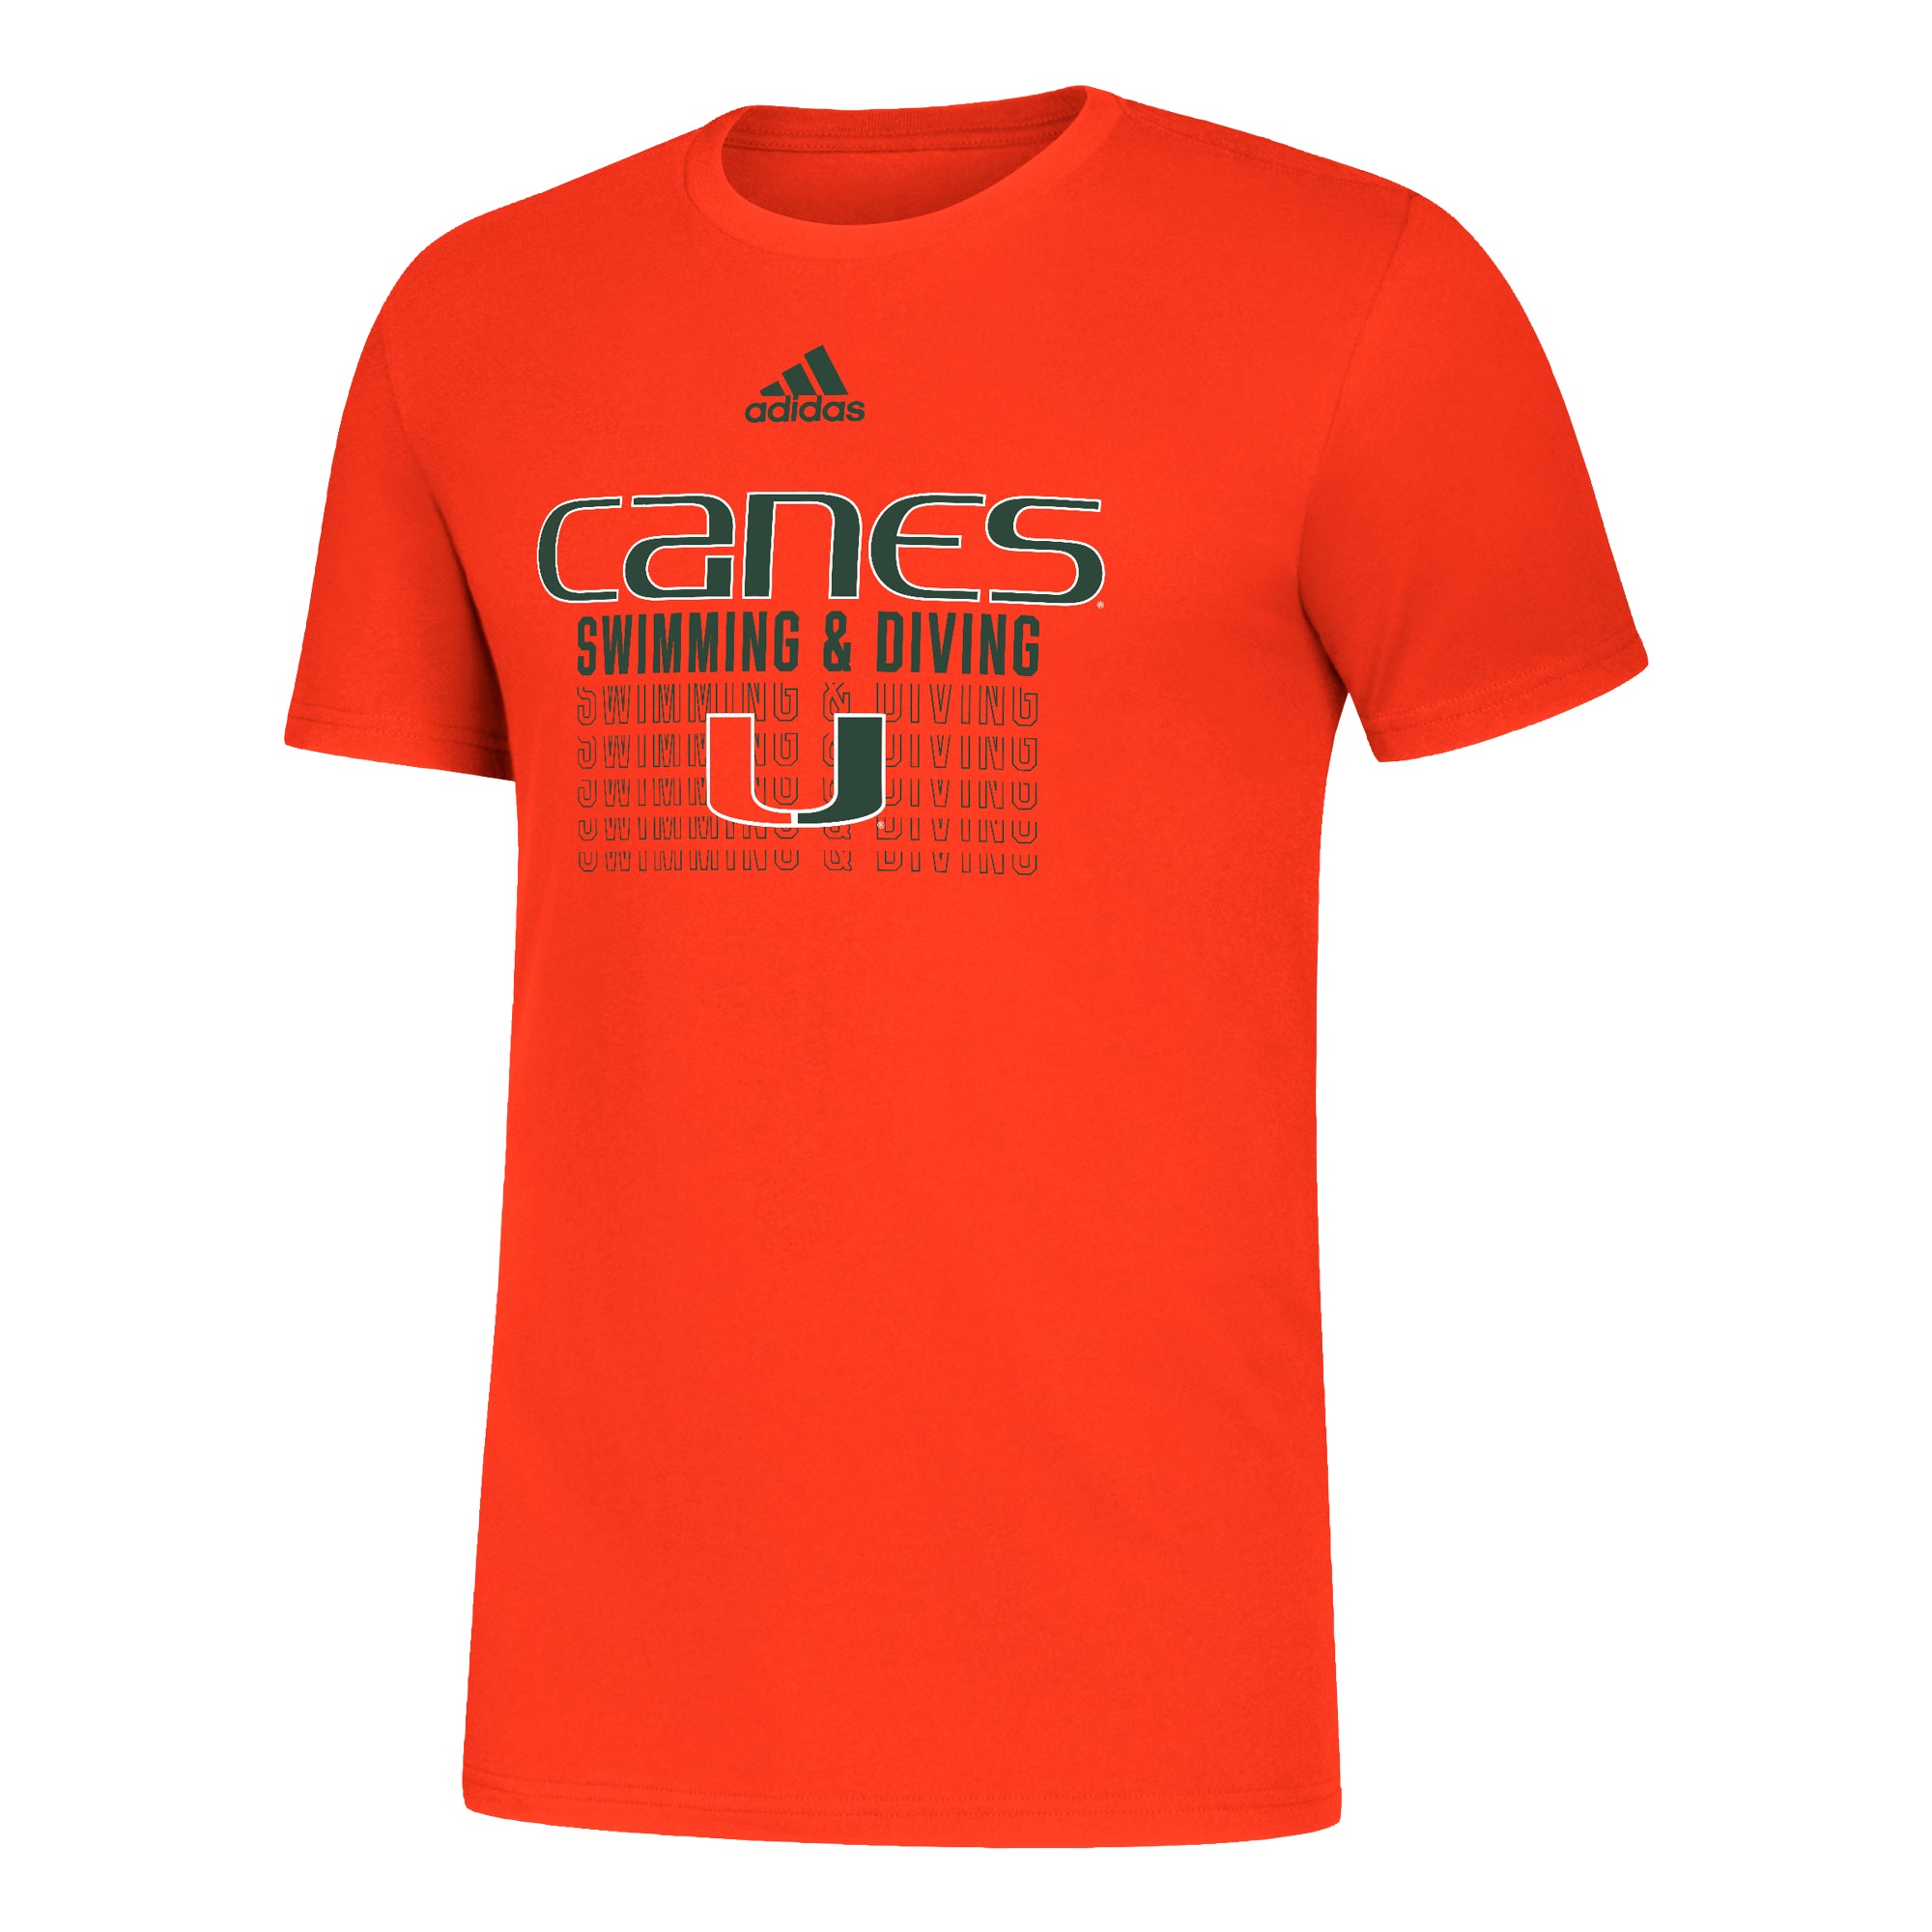 Miami Hurricanes adidas Swimming and Diving Amplifier SS T-Shirt - Orange